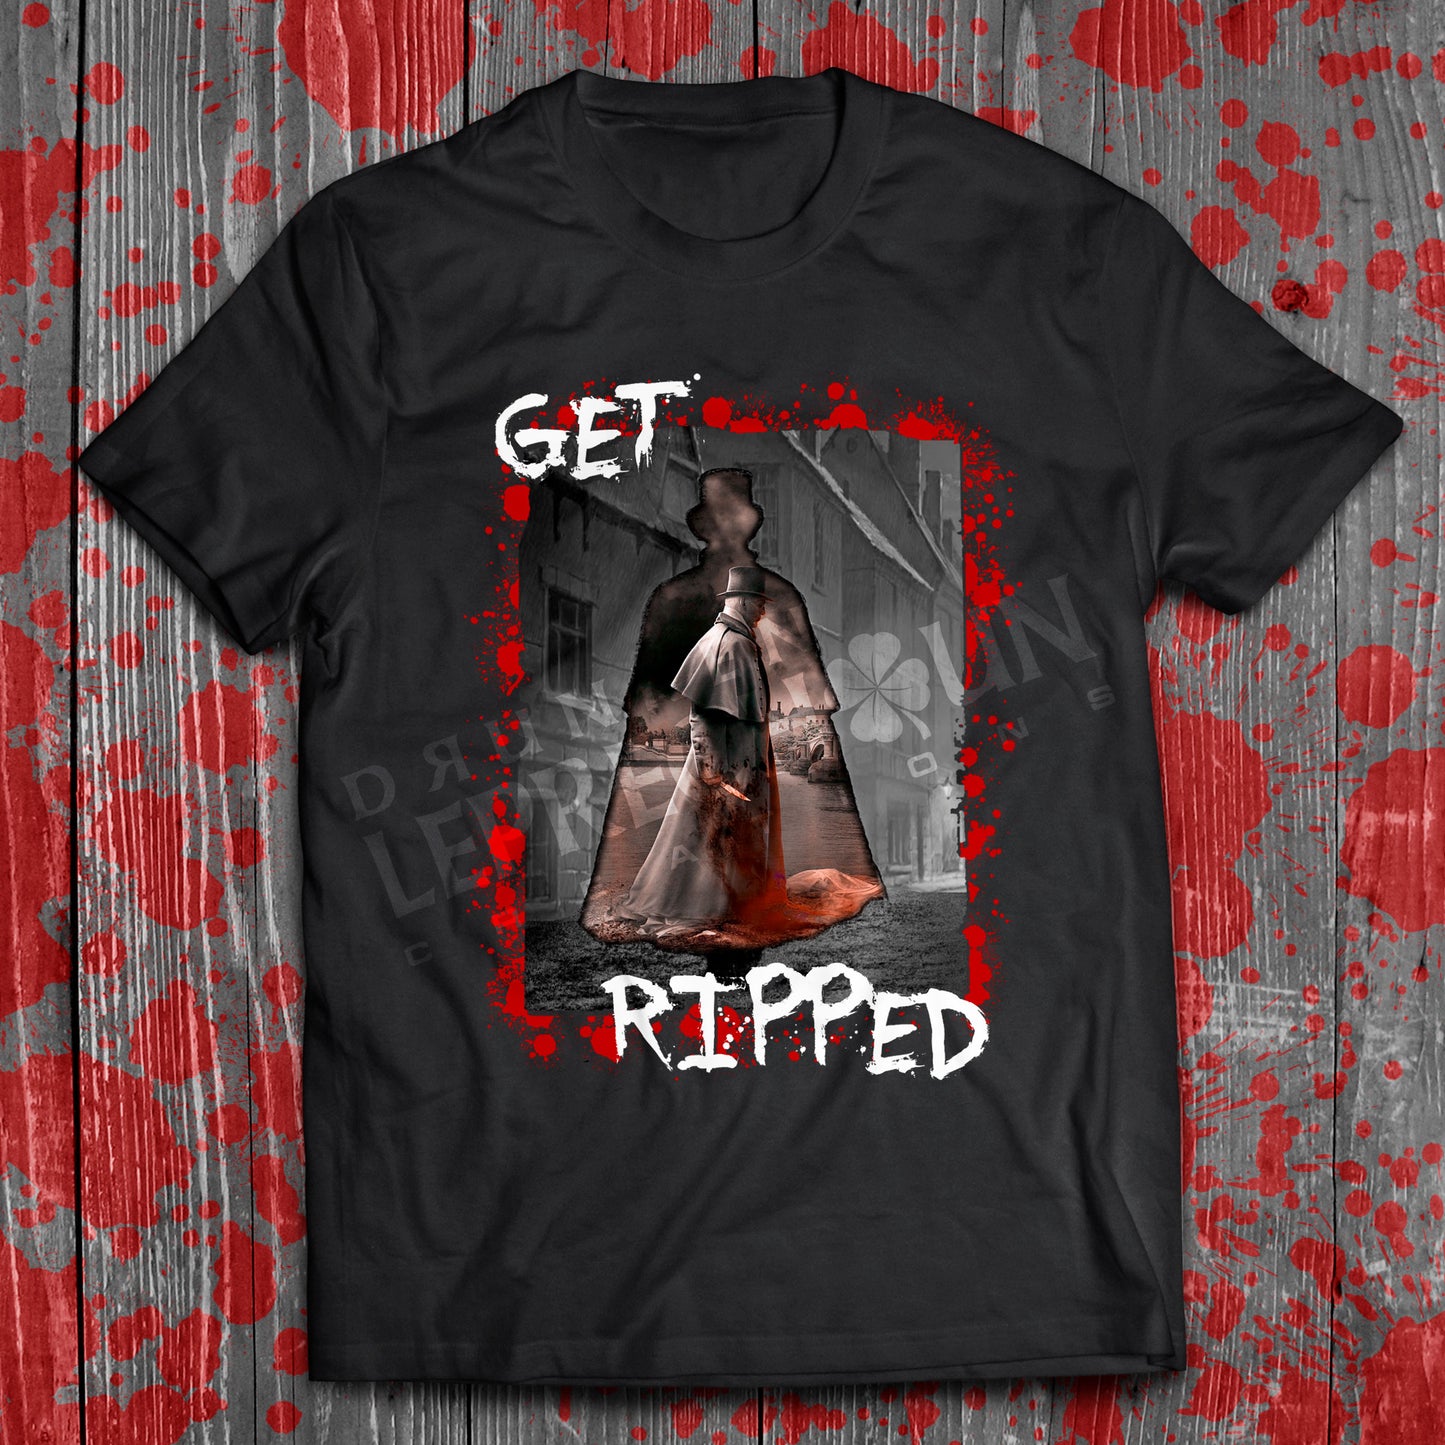 Jack the Ripper - Get Ripped